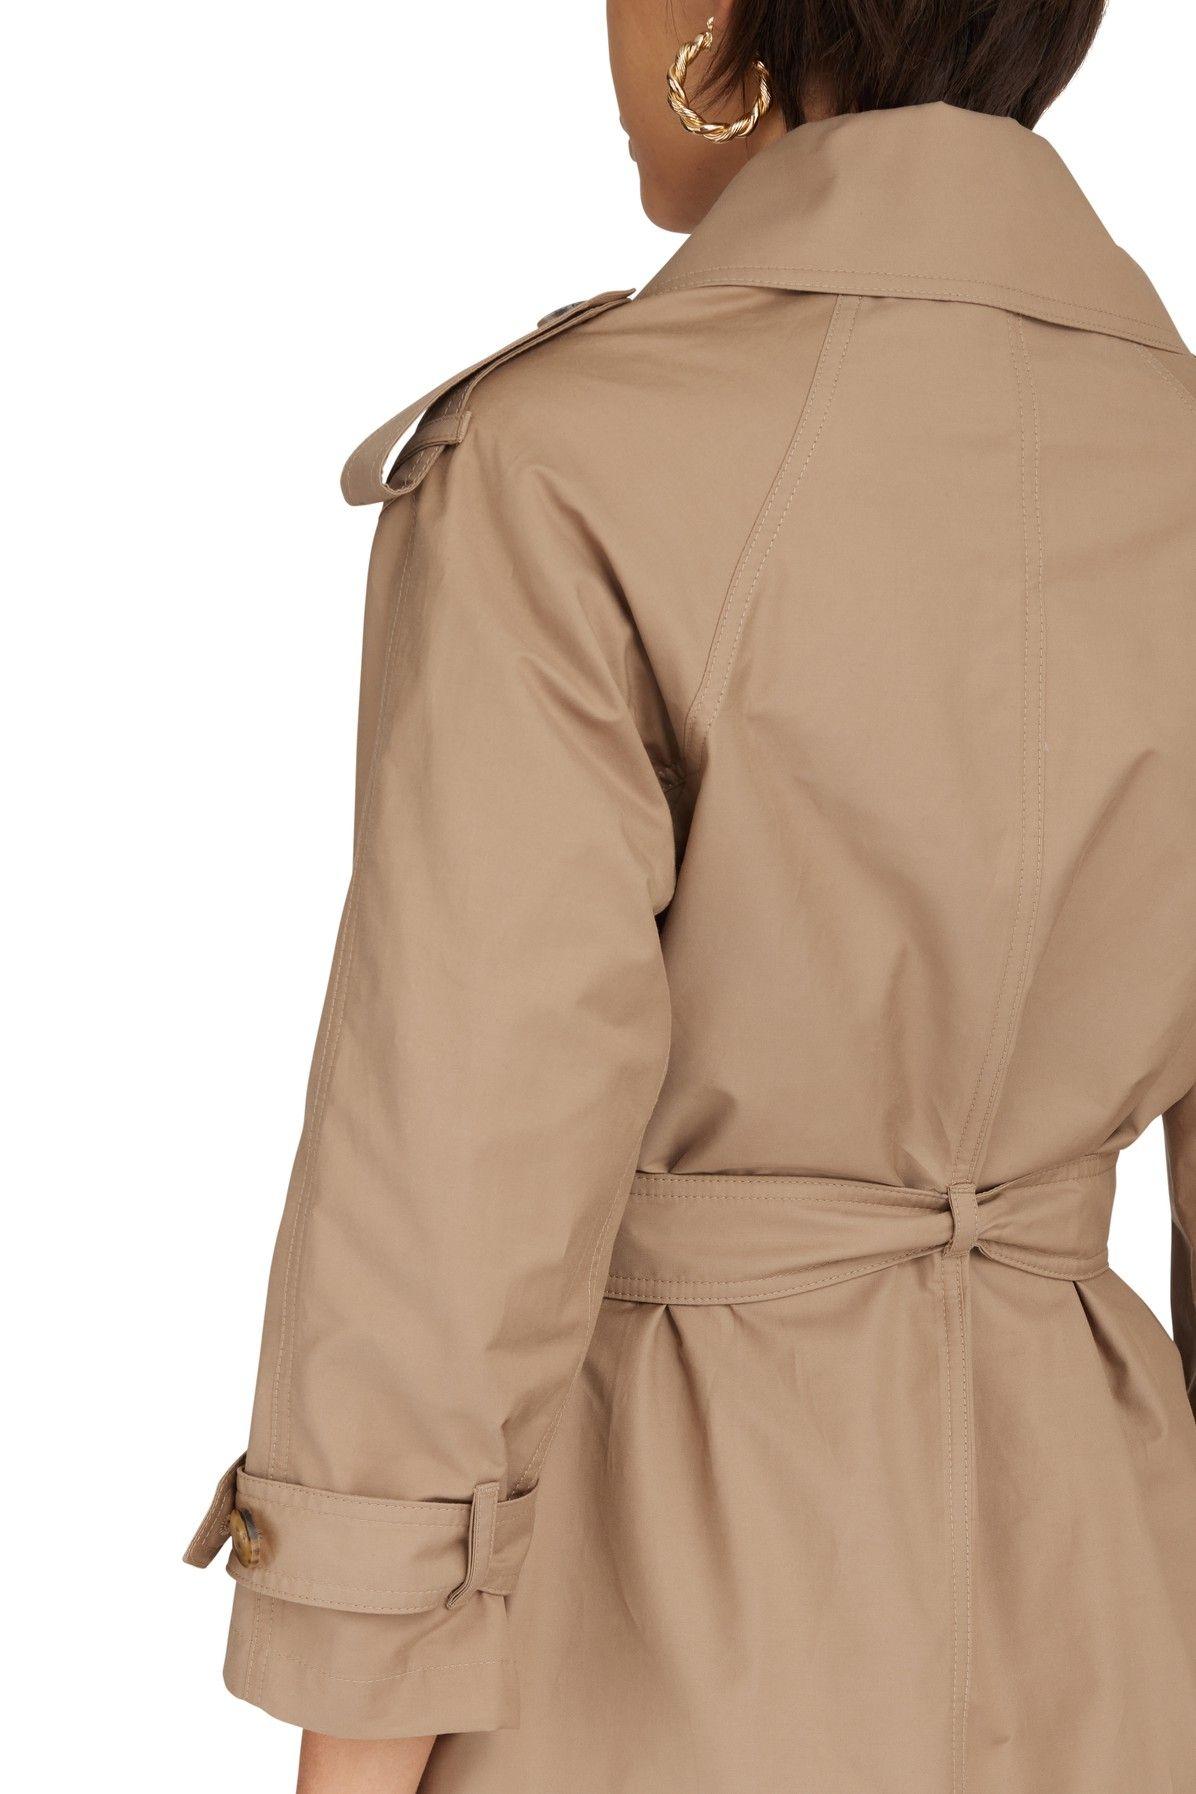 Max Mara Trench Coat - The Cube in Natural | Lyst